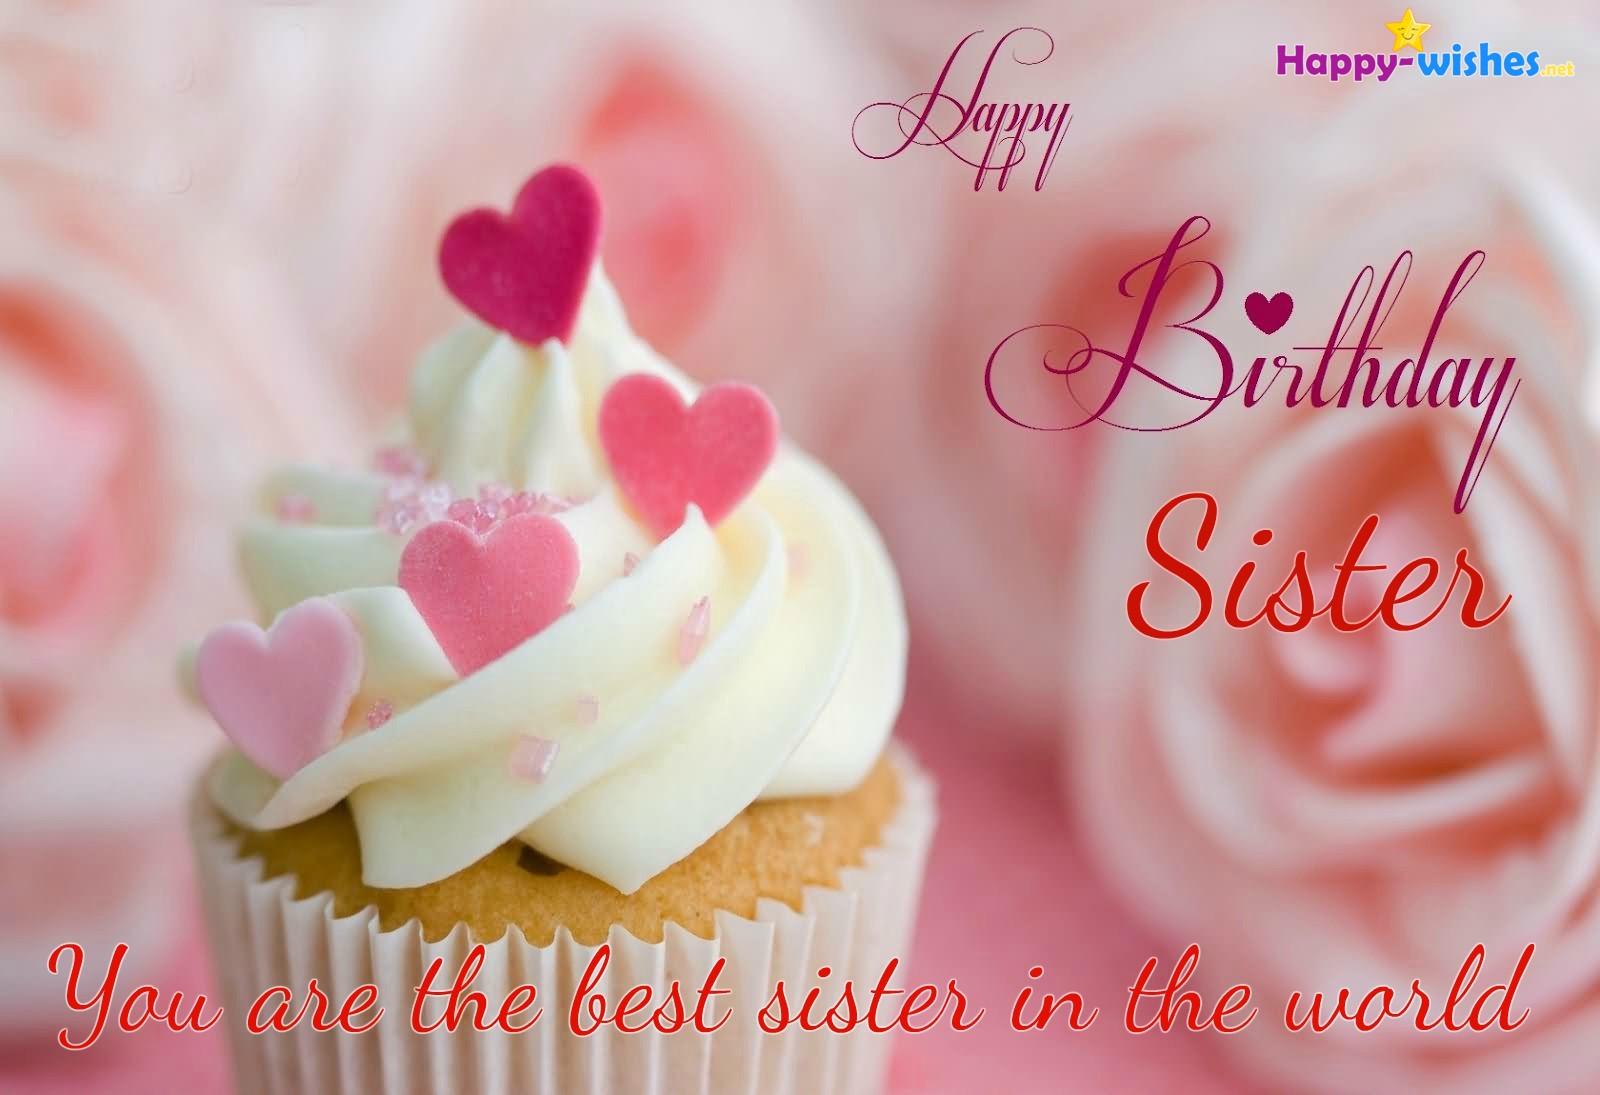 Happy-birthday-images-for sister